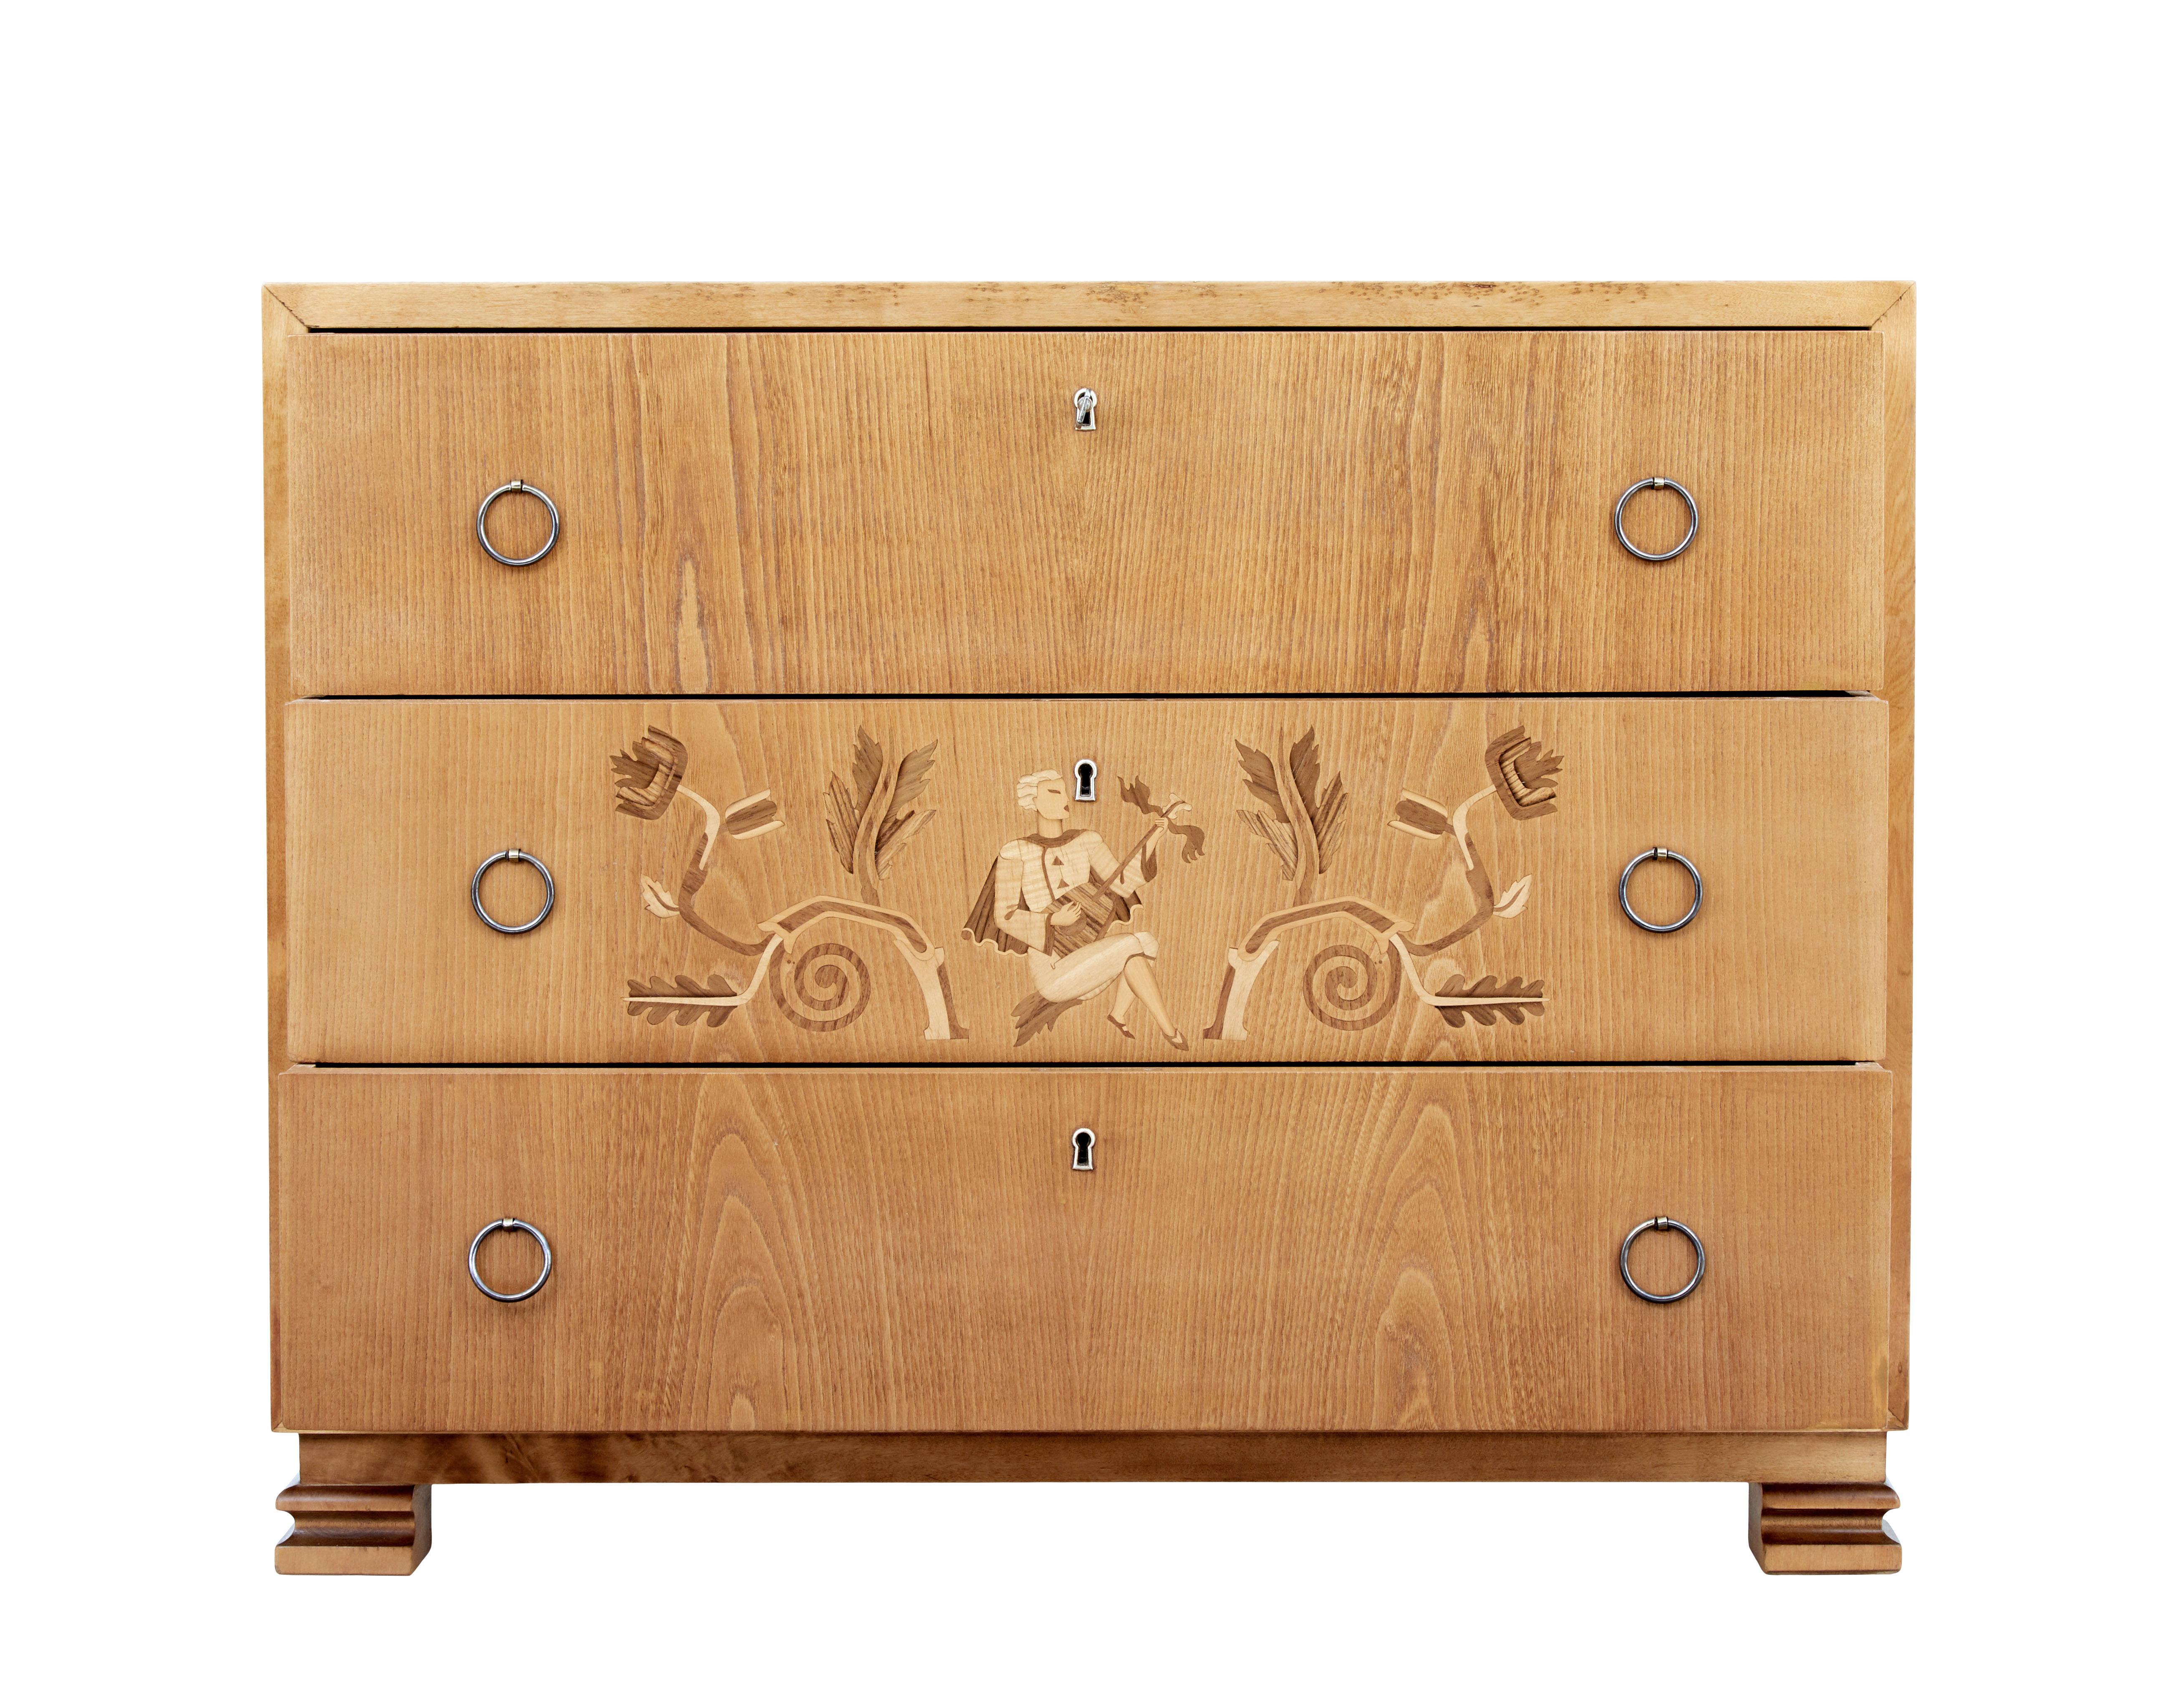 Art Deco Mid-20th Century Elm and Birch Swedish Grace Chest of Drawers